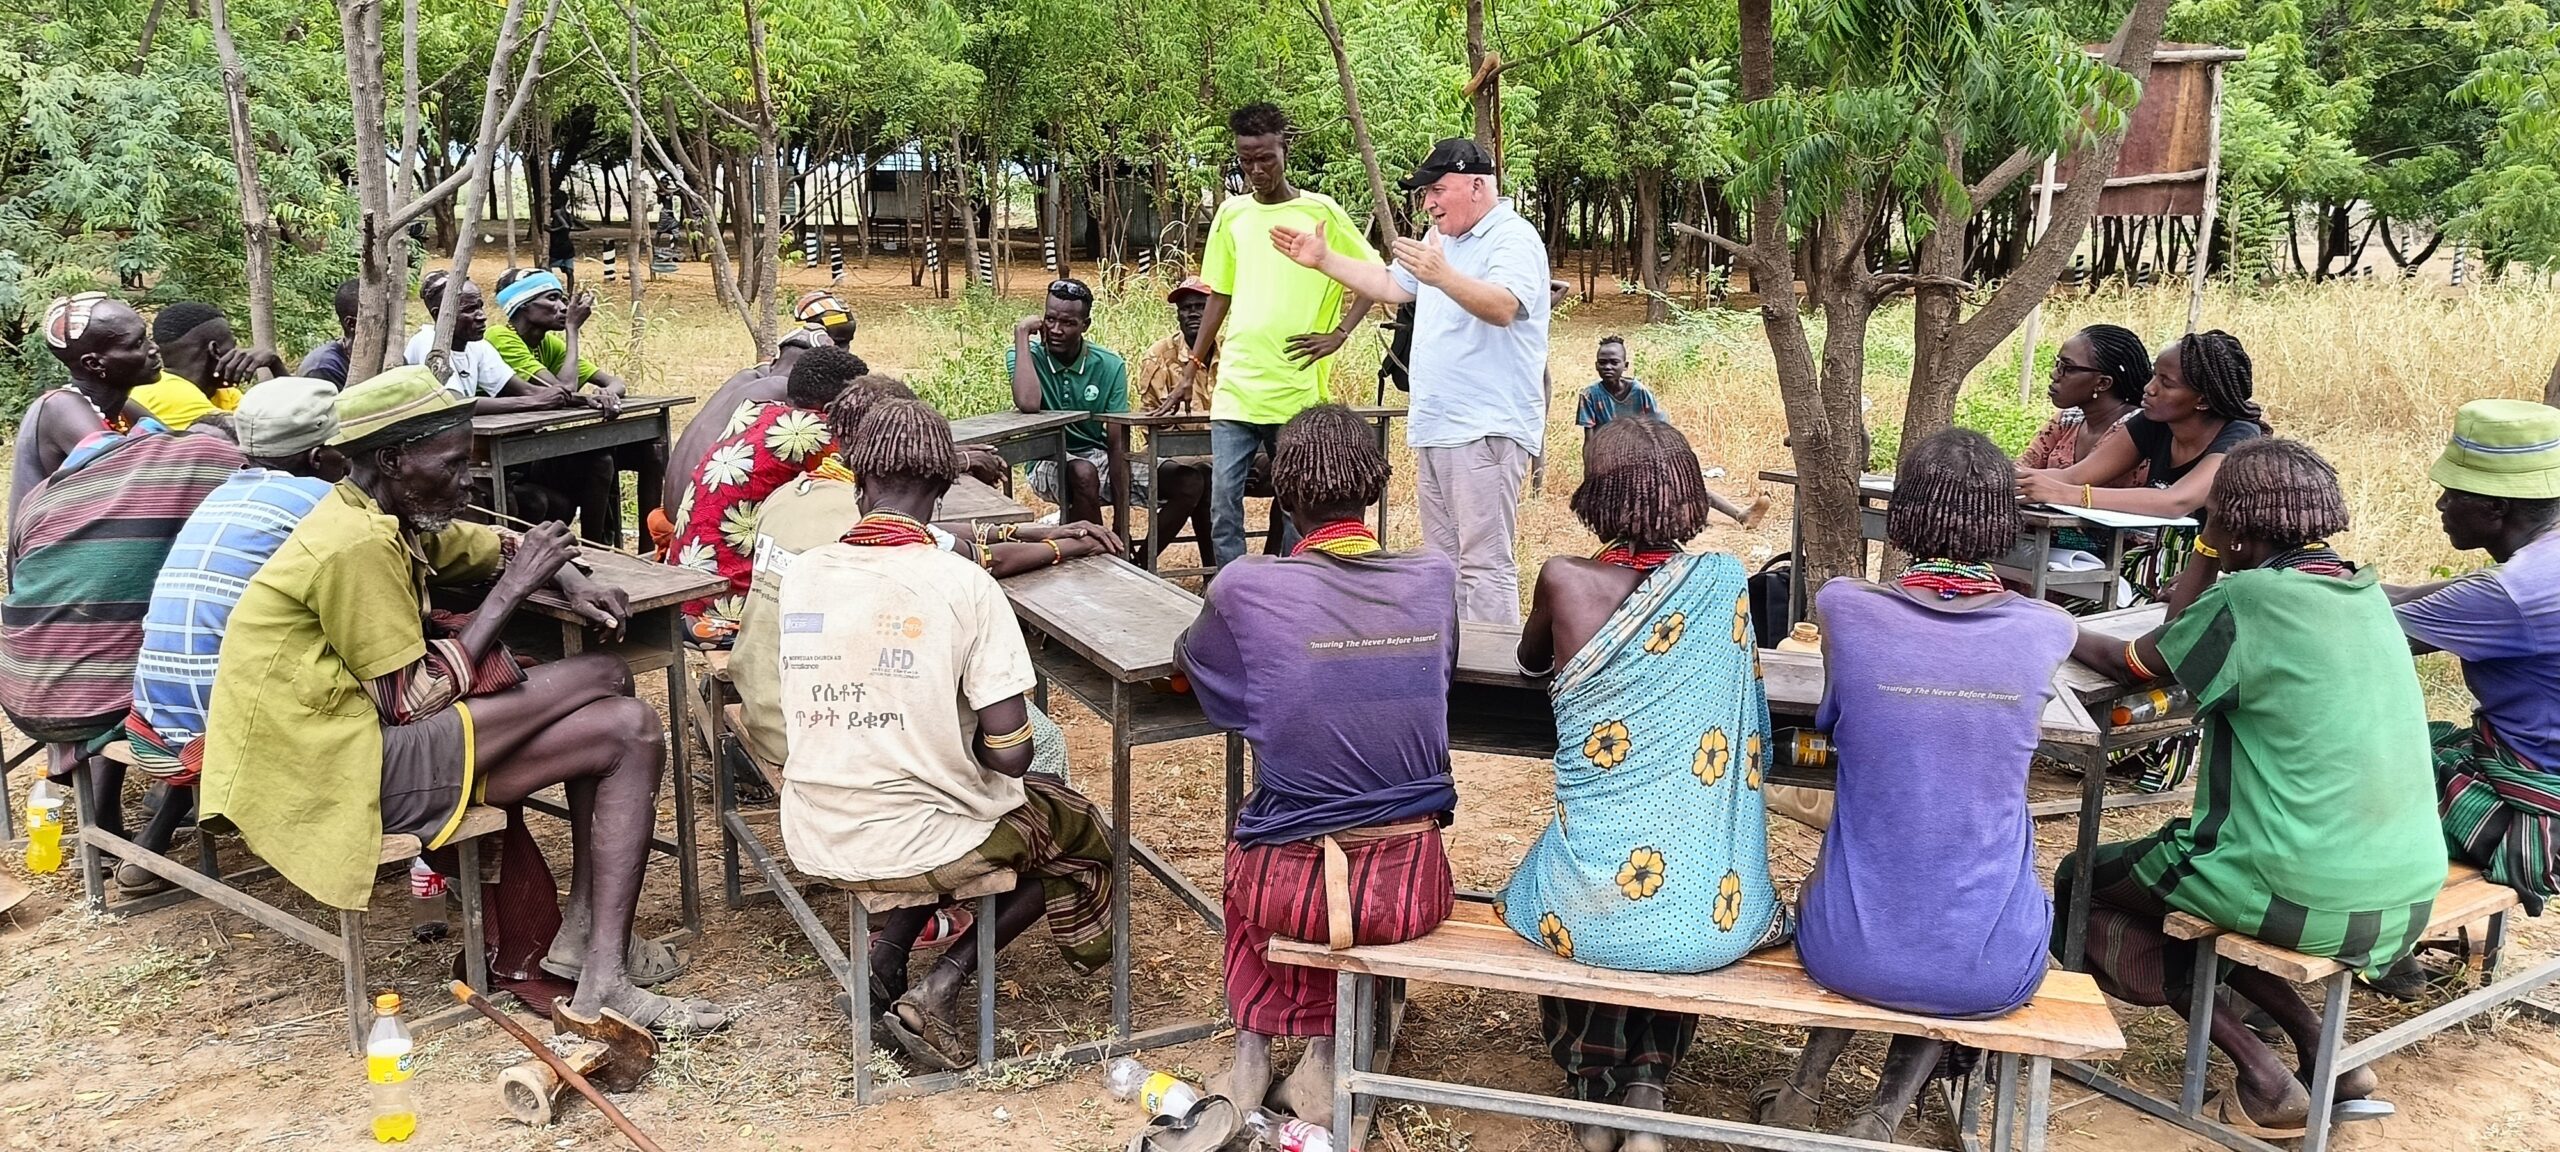 Shalom-SCCRR’s Conflict Resolution Initiatives Bring Hope and Development to Turkana and Dassanech Communities Located in The Ilemi Triangle along the Kenya-Ethiopia border.